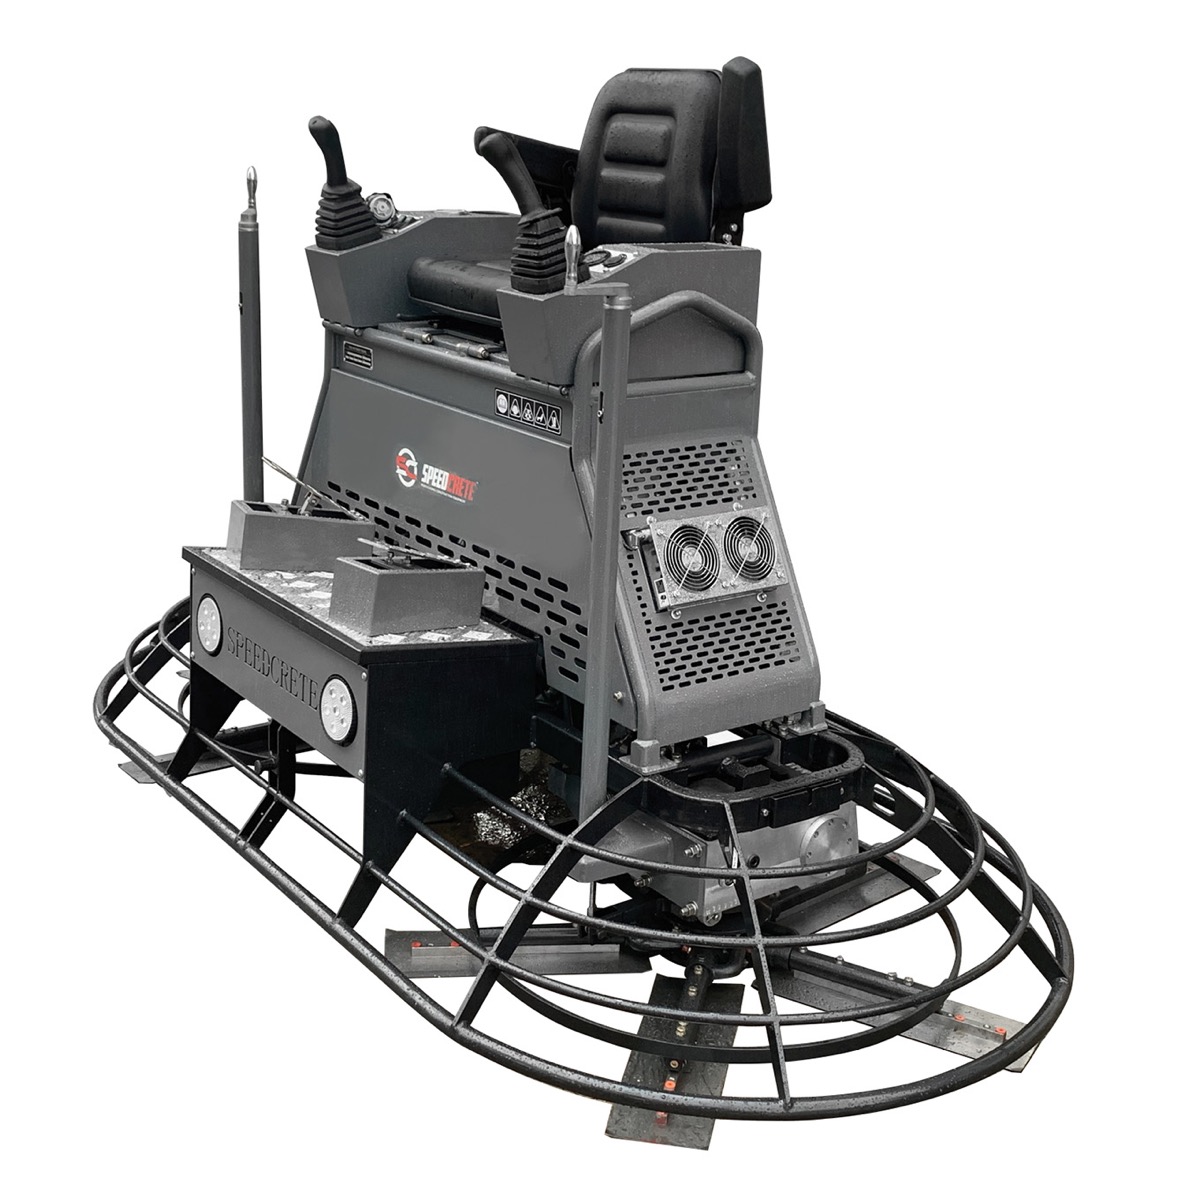 This powerful 5 blade 46" ride-on trowel is used to level concrete across large slabs and bays. Speedcrete have developed this machine as the ultimate concrete professional rider for the United Kingdom.